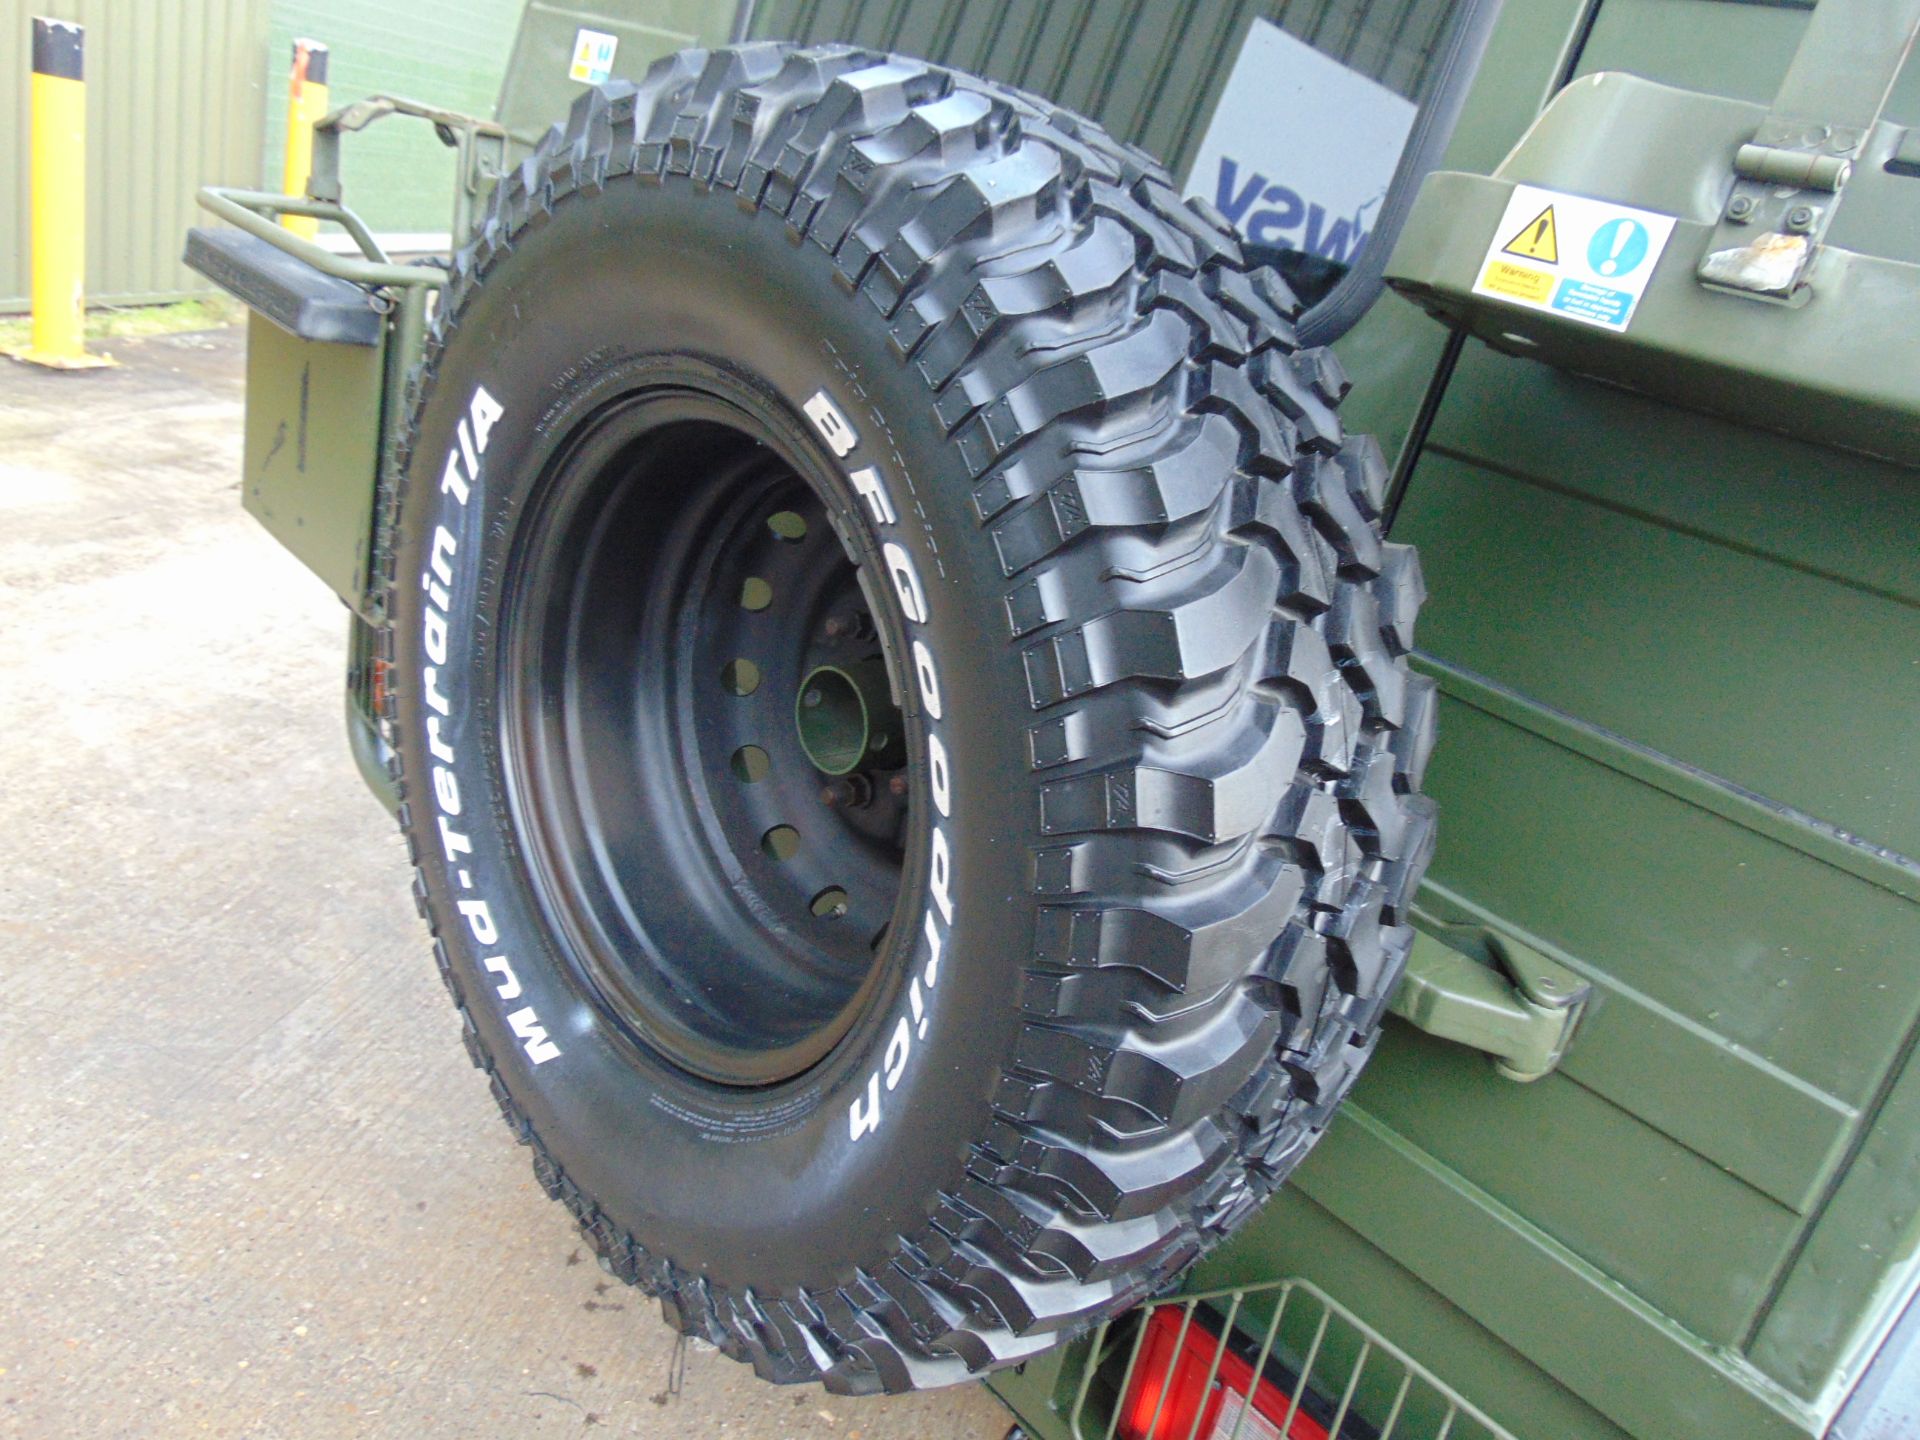 Military Specification Pinzgauer 716 MK 4X4 Hard Top ONLY 1,312 MILES!!! - Image 16 of 25